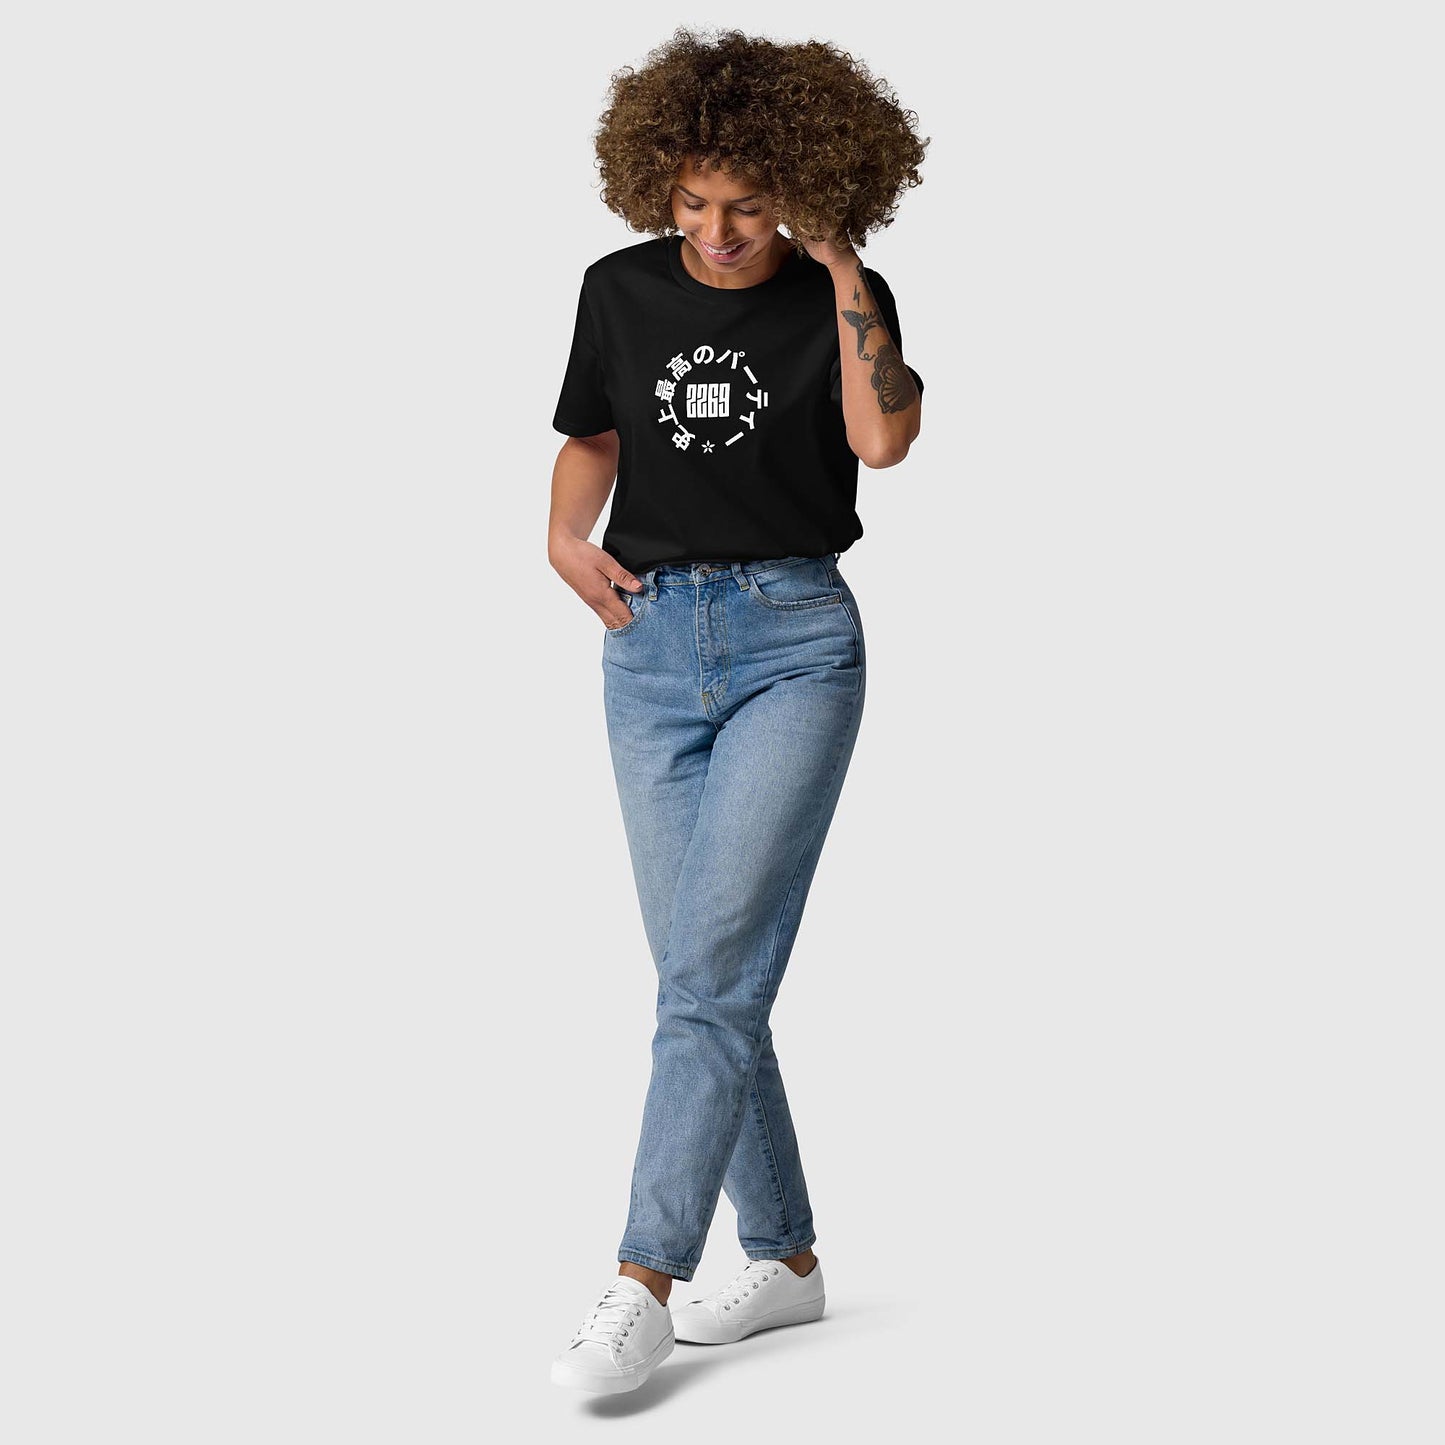 Unisex black organic cotton t-shirt with Japanese 2269 party circle